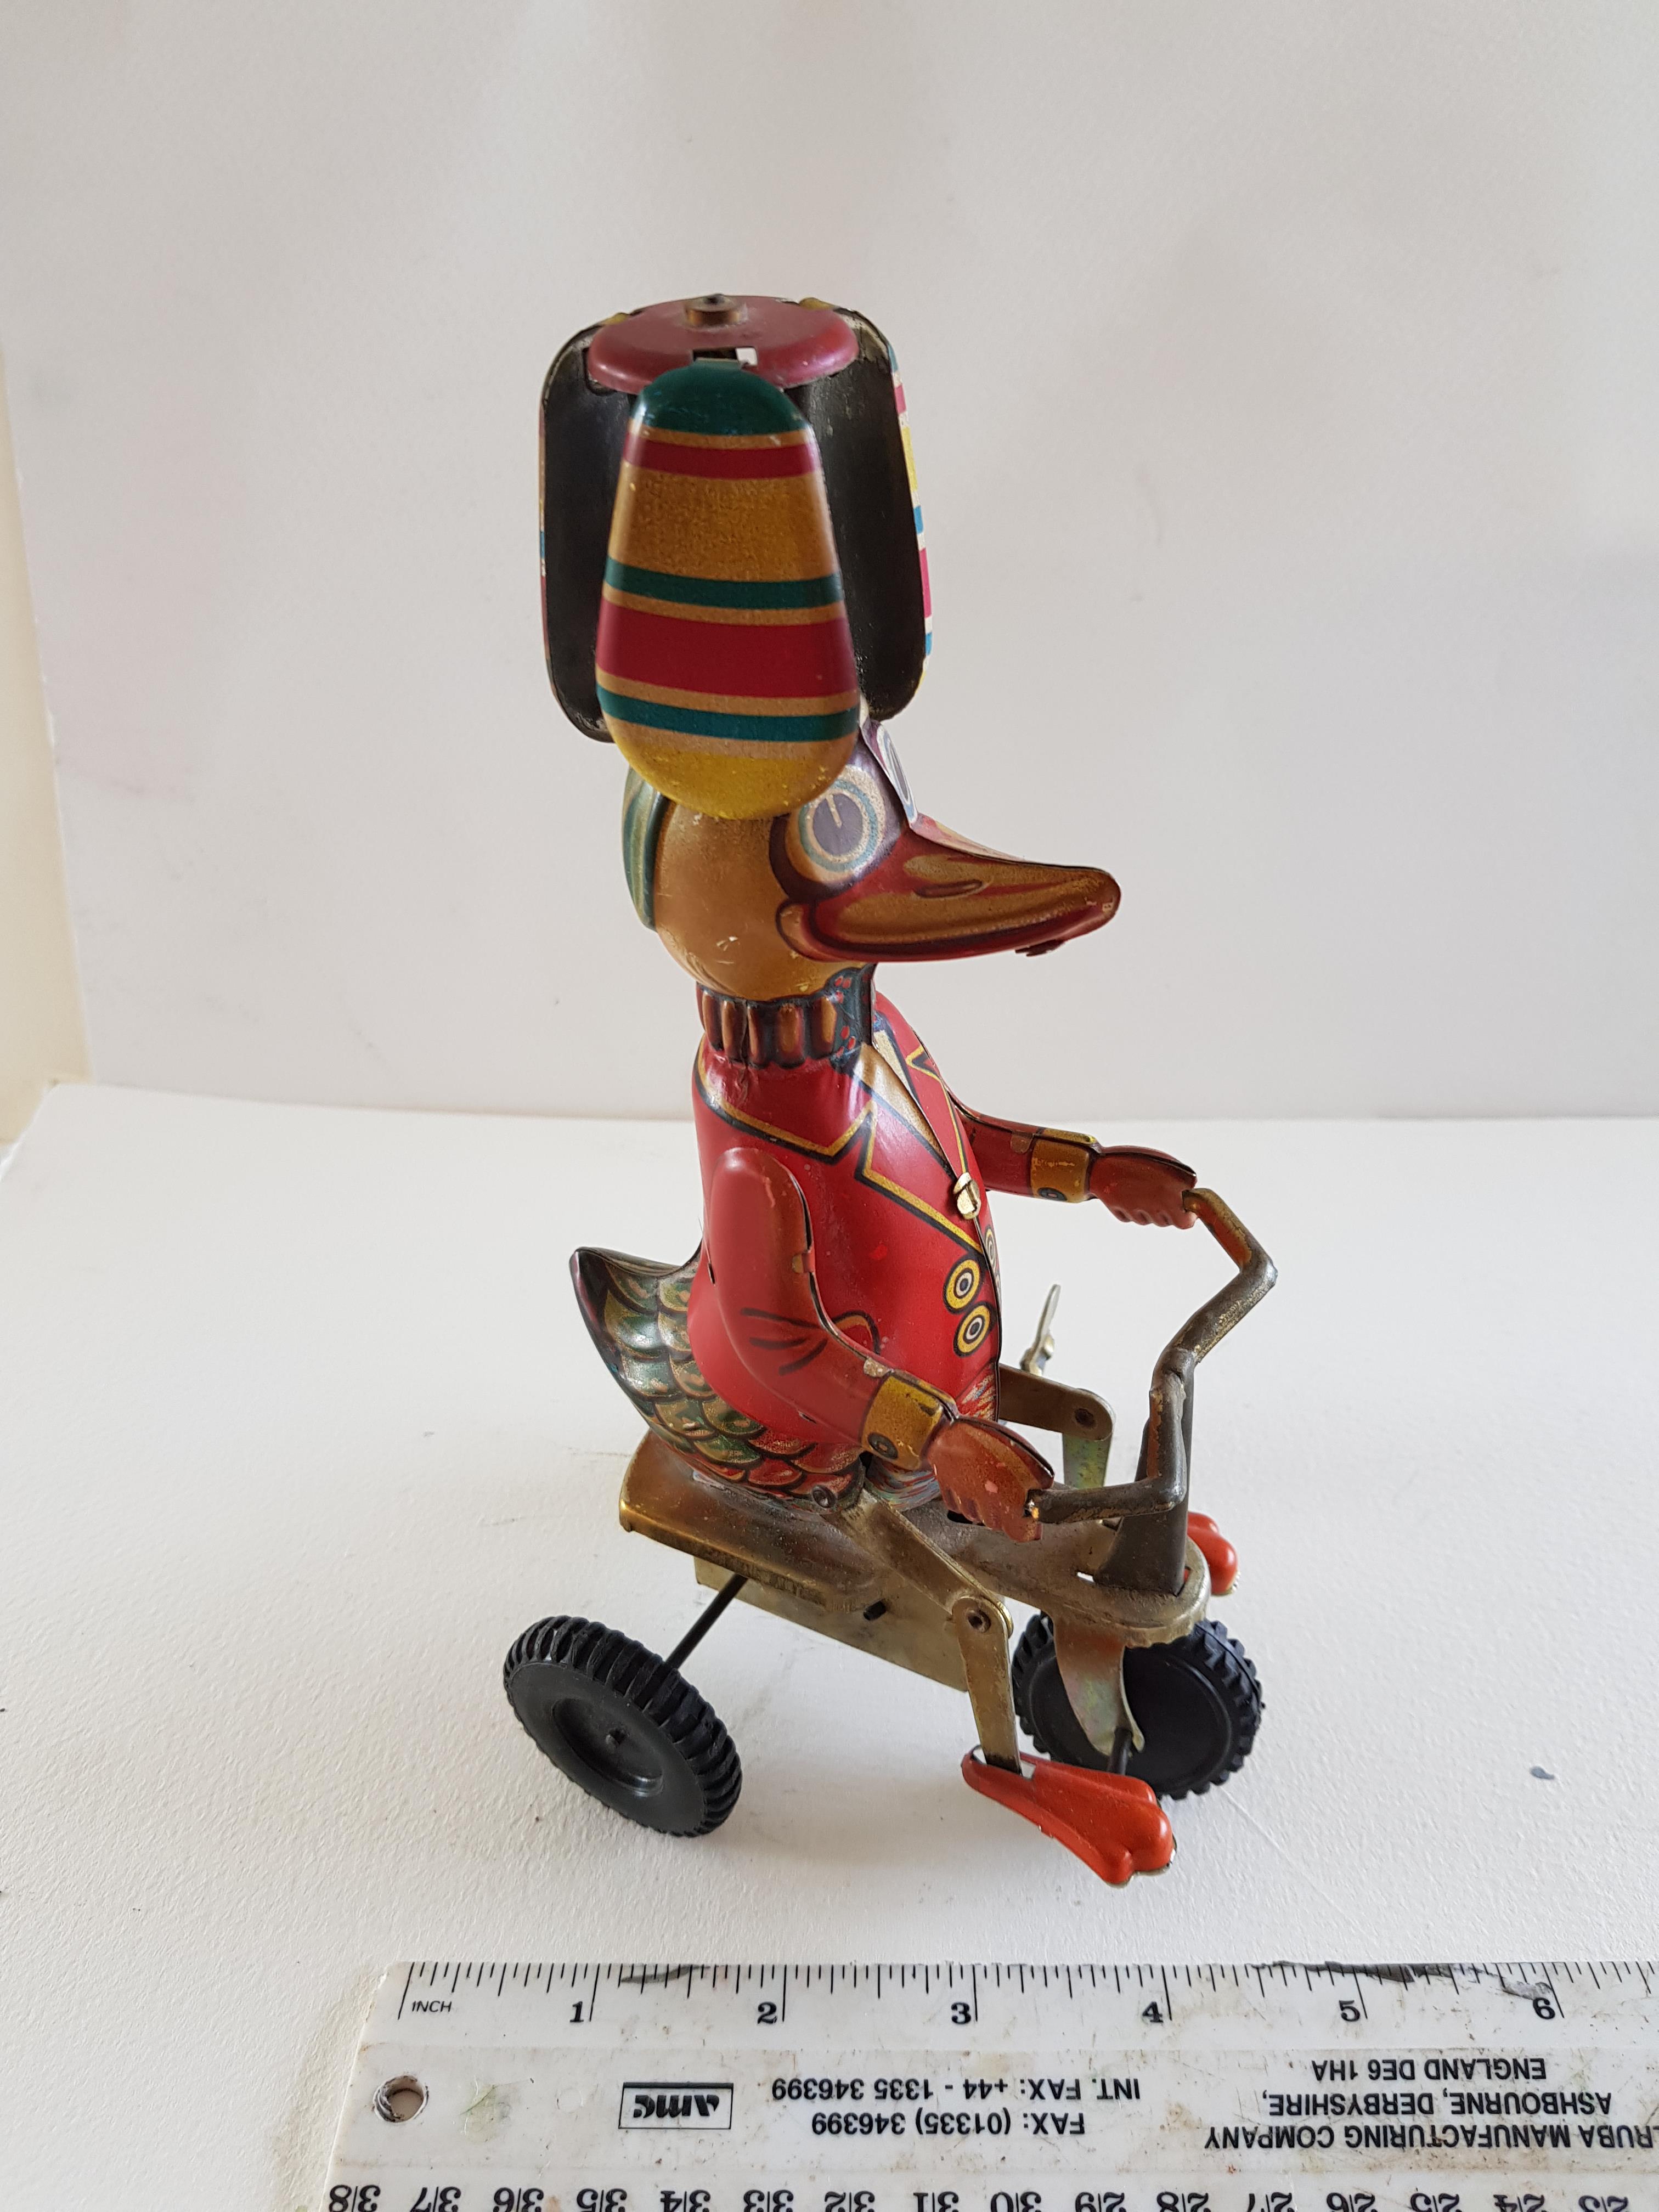 Vintage Tin Plate Wind Up Duck On a Bicycle - Image 2 of 2